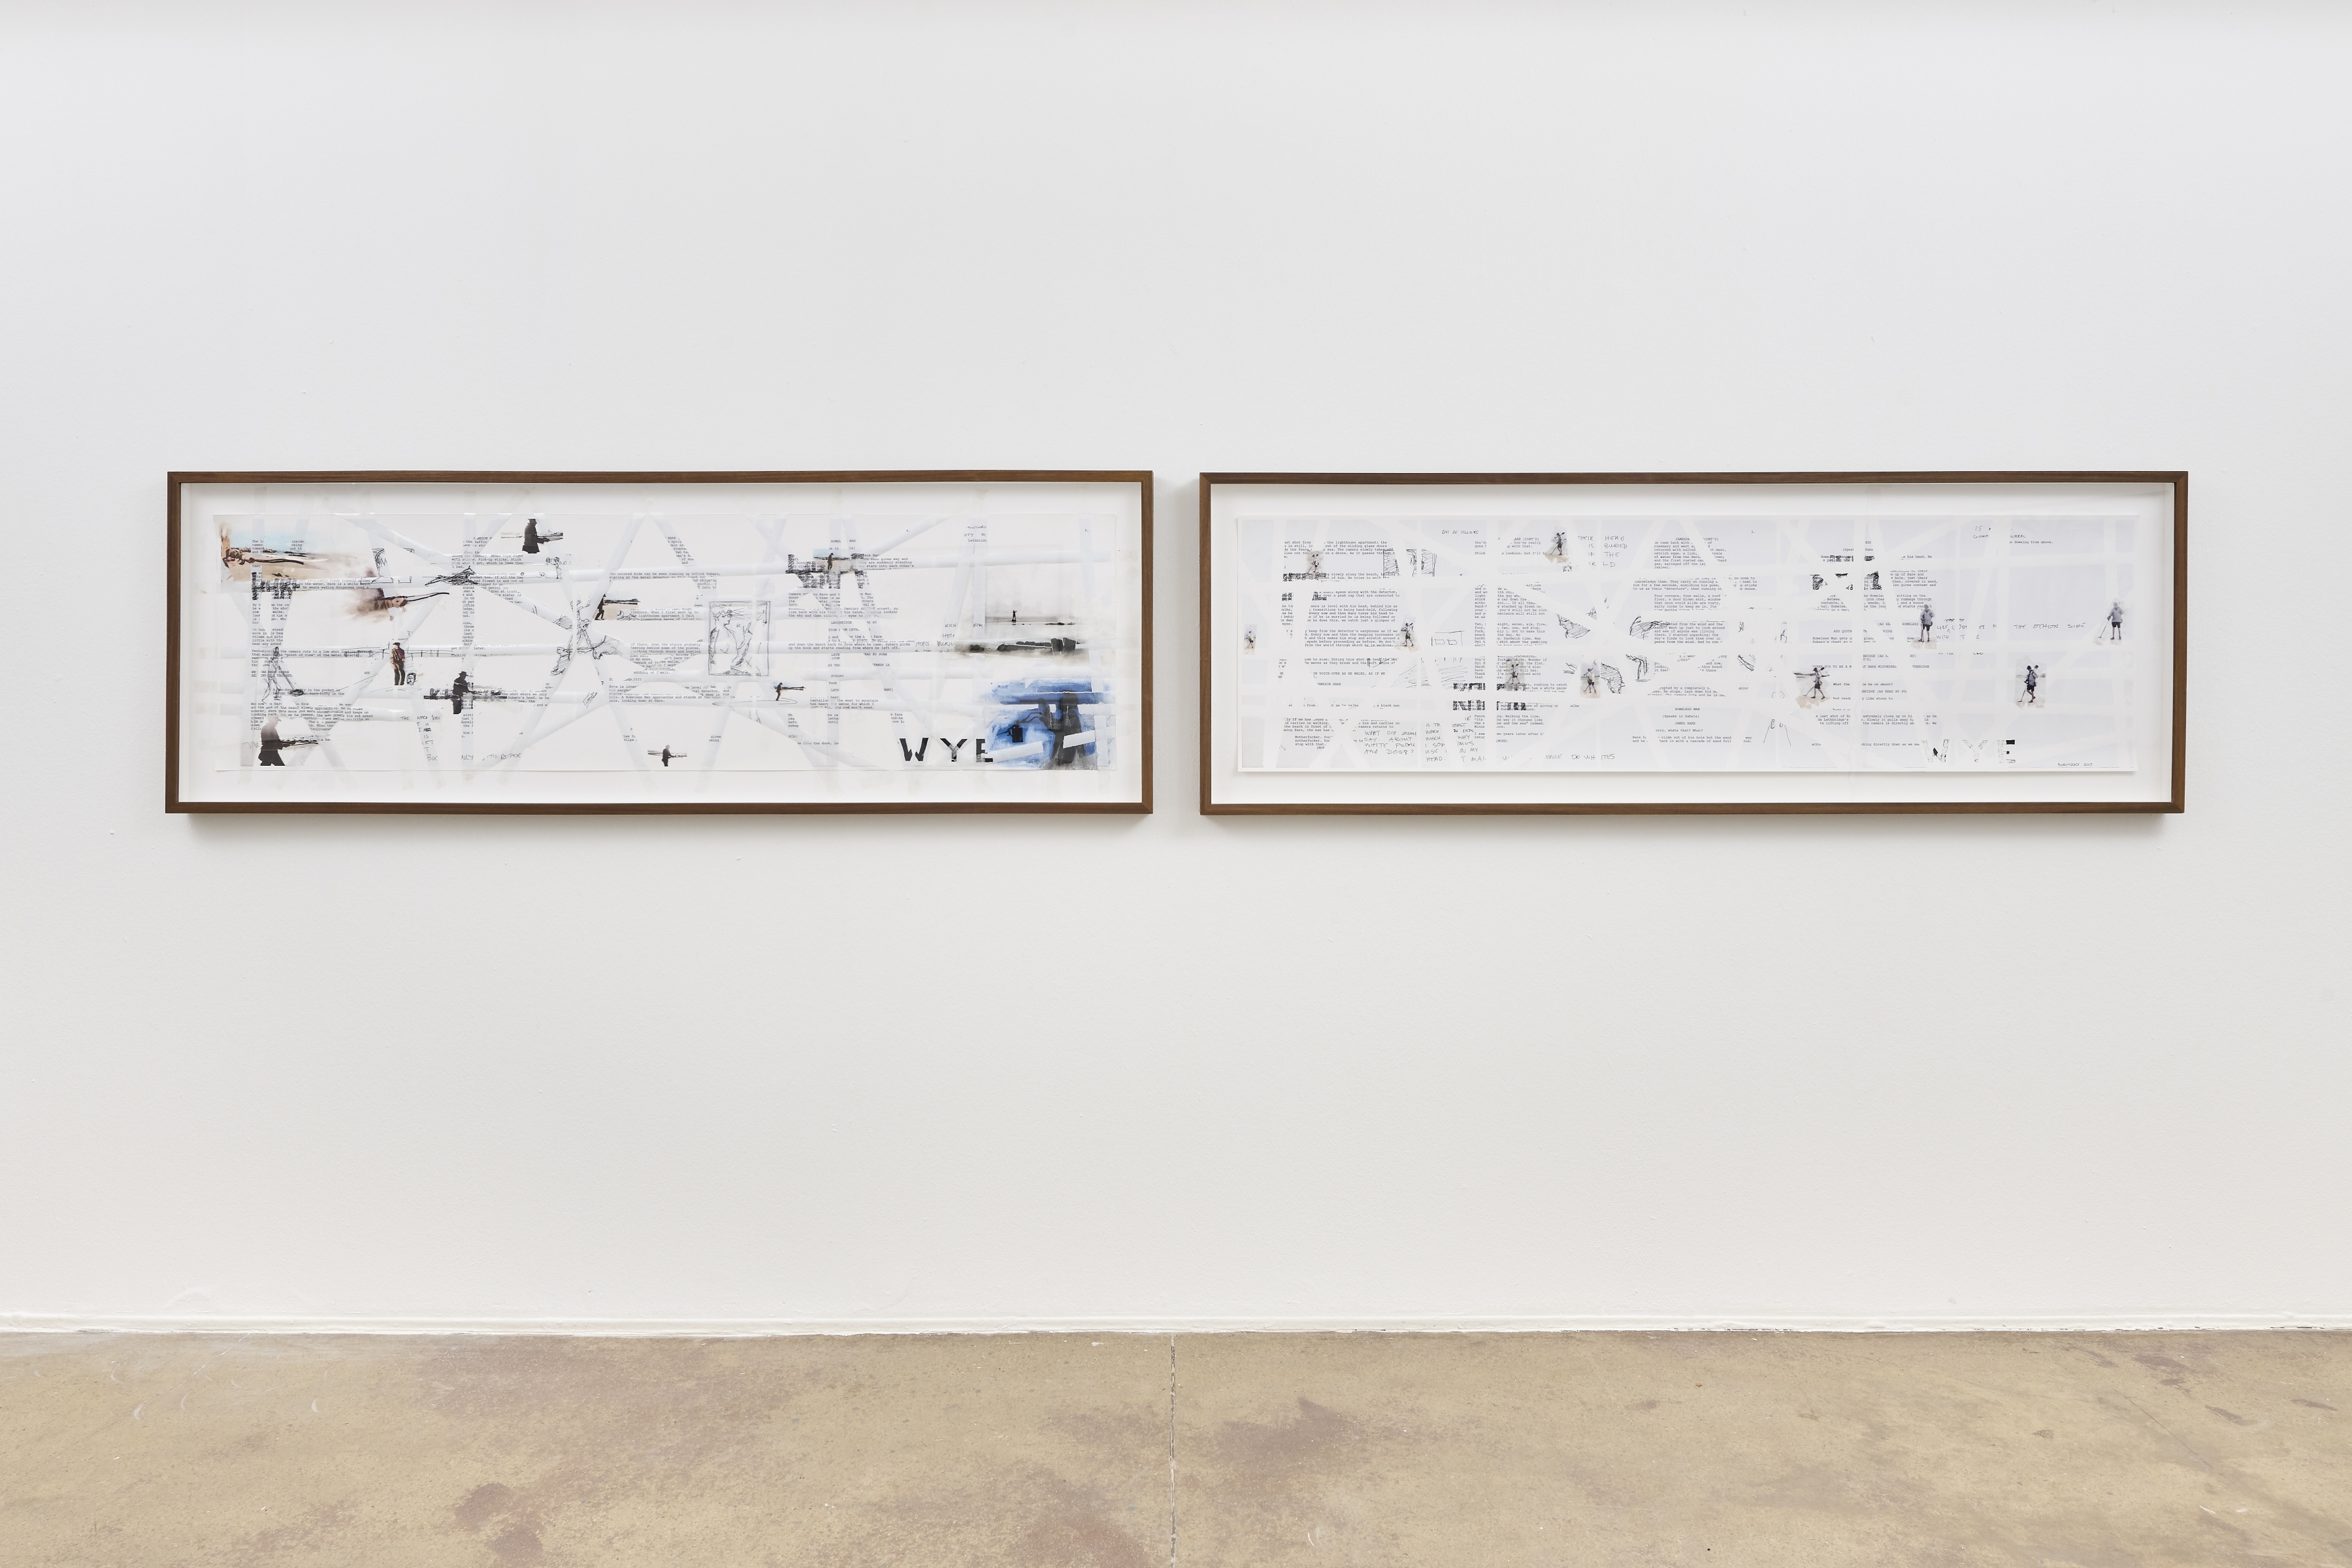 Mikhael Subotzky

Sticky-tape Transfer 32 - Script Sketch (or Detecting and Divining)

2017

Pigment inks and J-Lar tape on cotton paper

Diptych (each): 55 x 196.5 cm

Frame (each): 74 x 213 x 6 cm

Sales enquiries